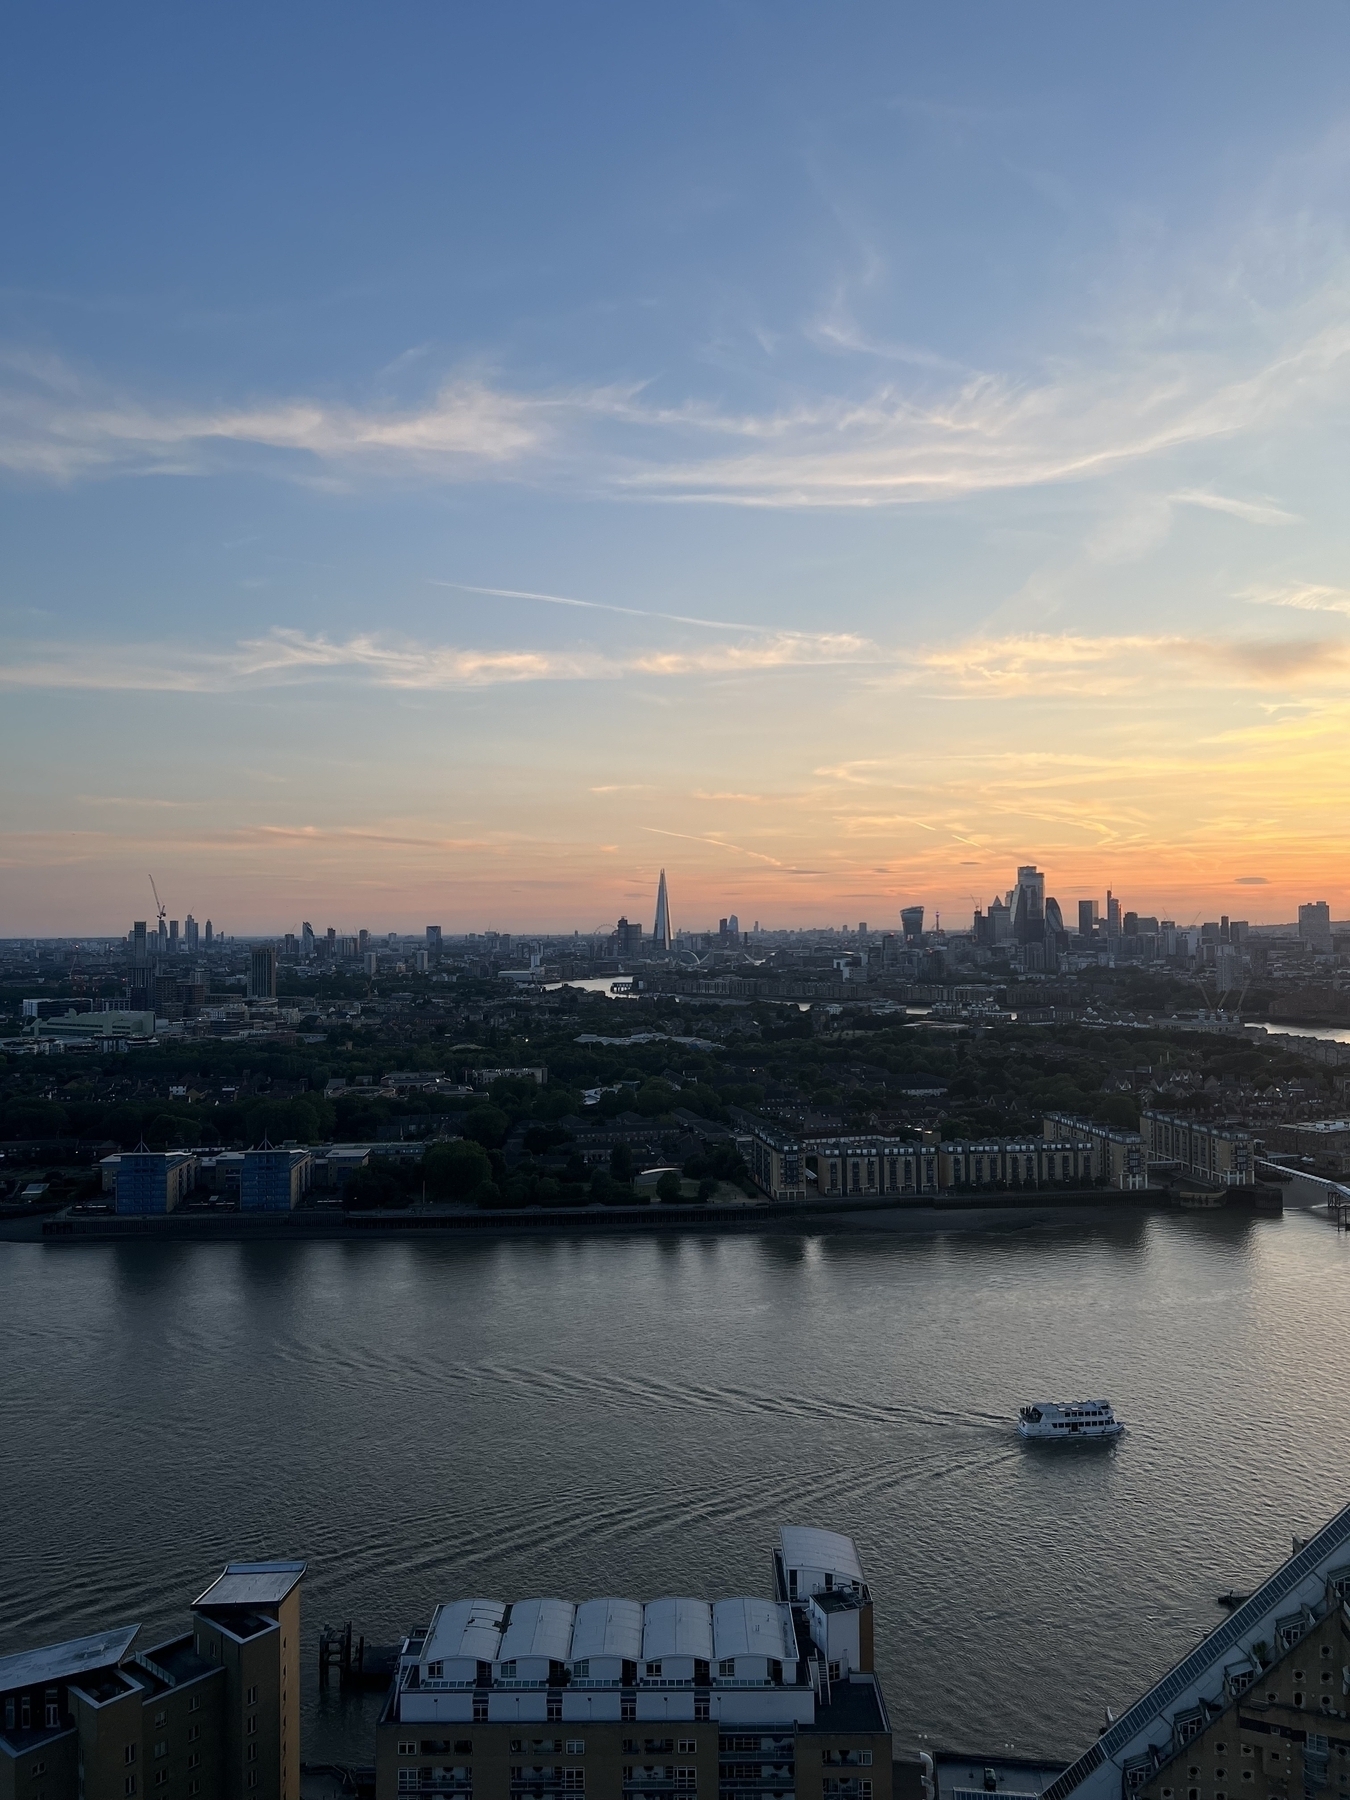 A view of the river Thames and London looking west, catching the edge of a sunset.  